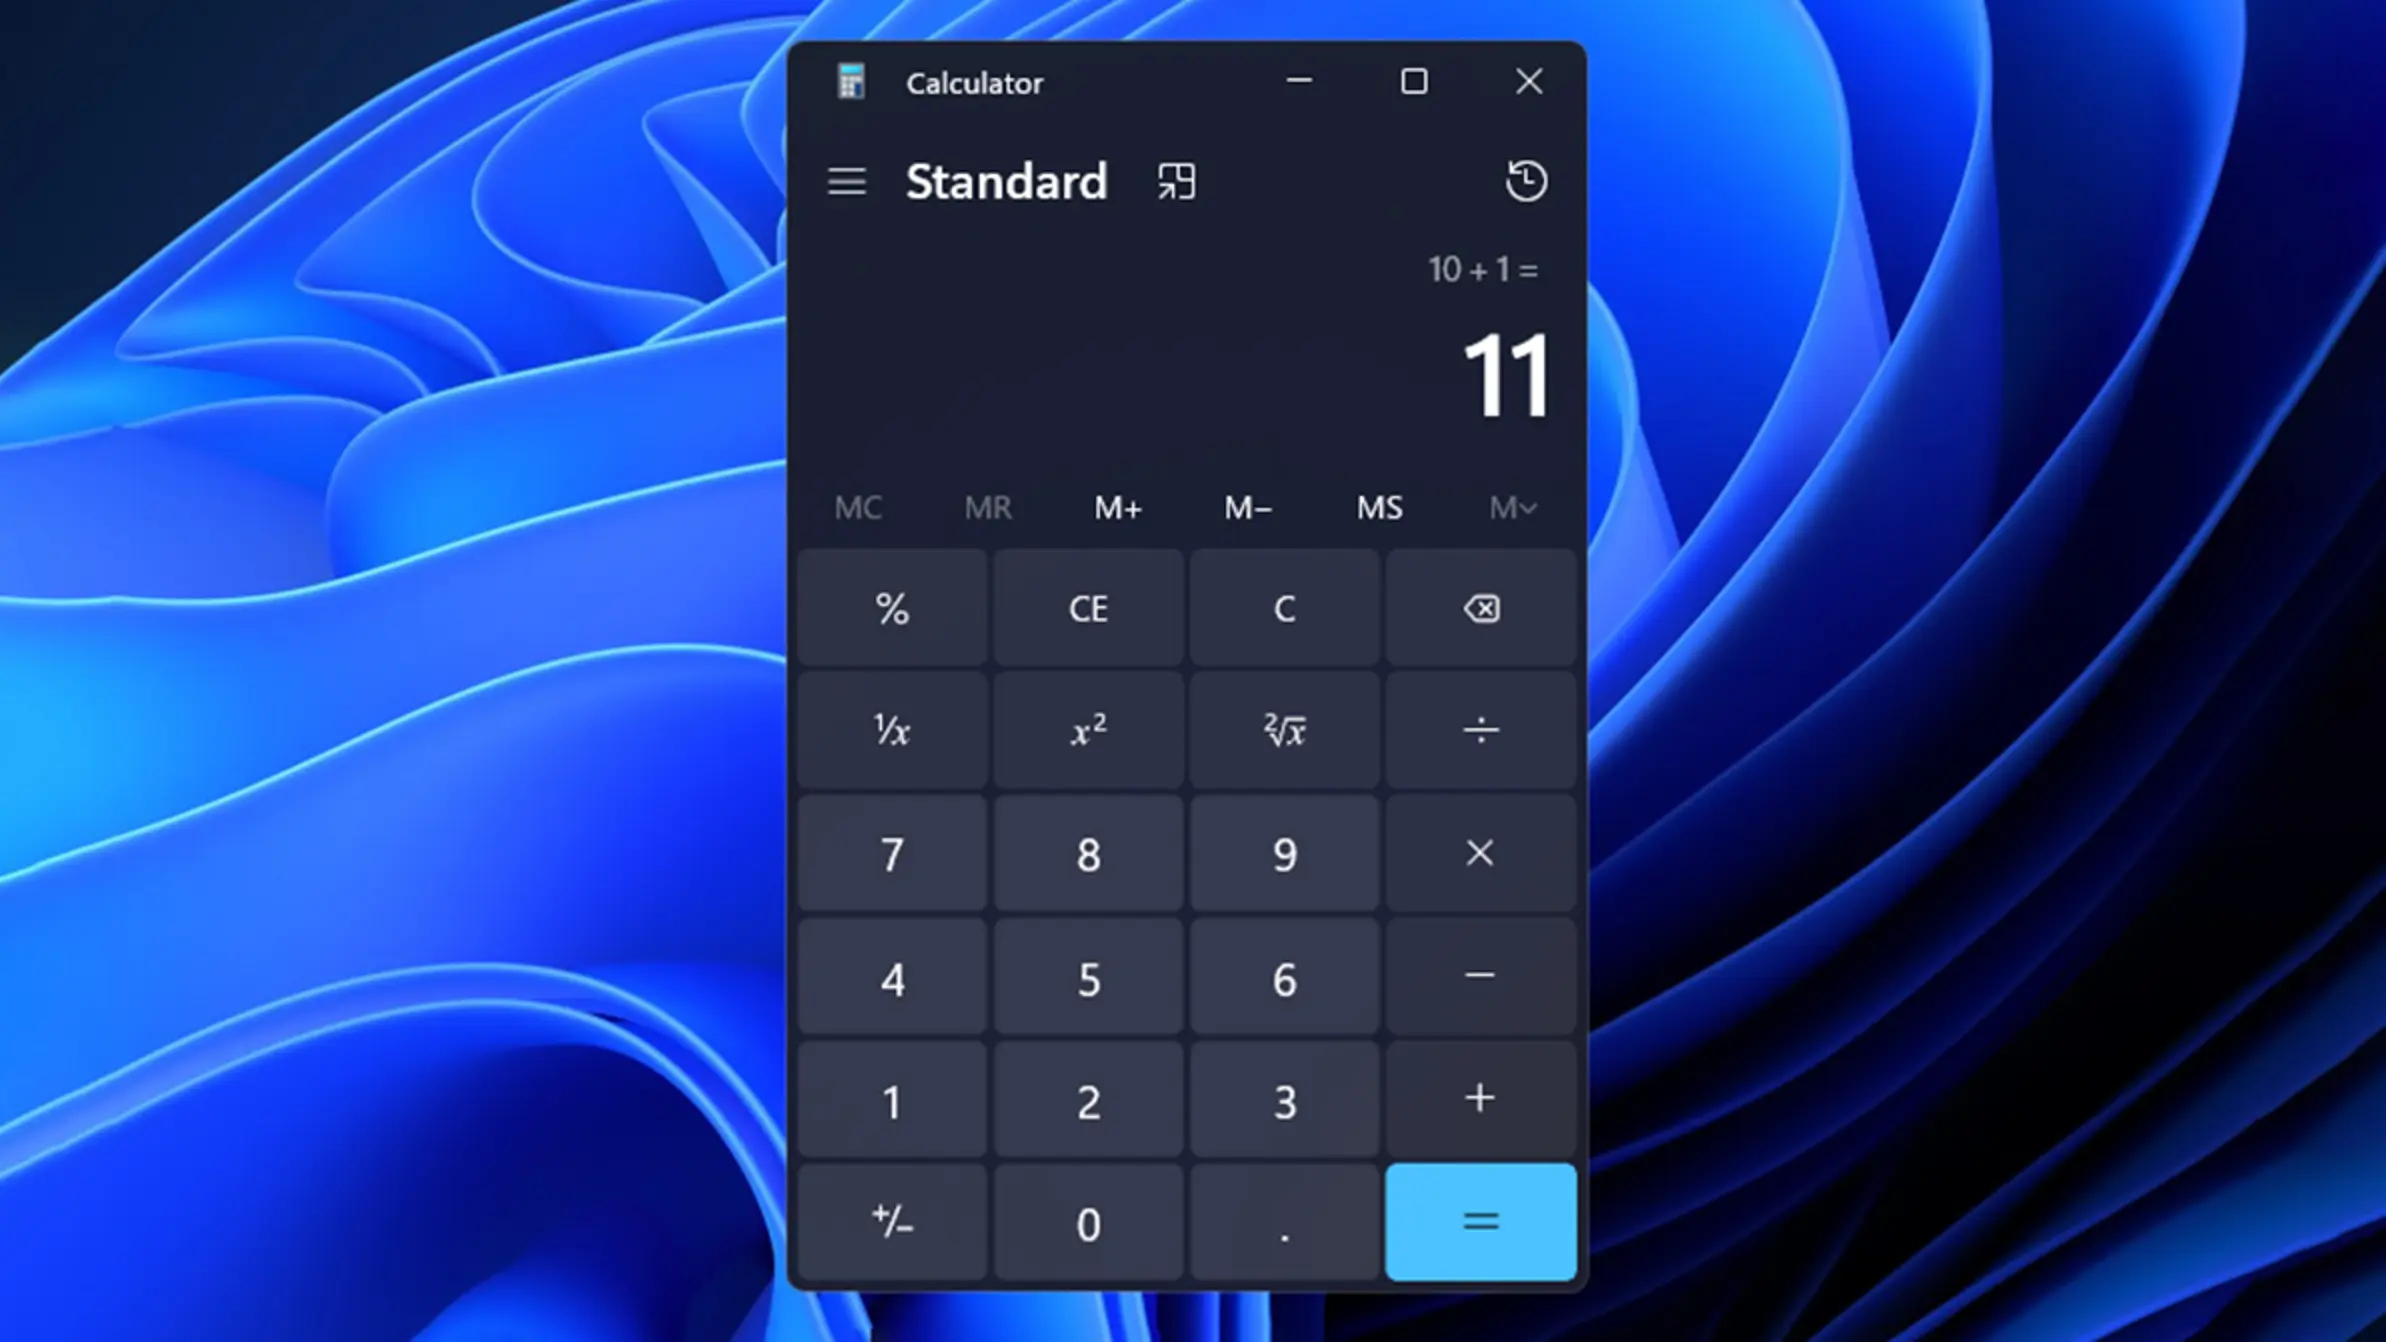 Cool and Helpful Uses For The Windows Calculator That You May Not Know About